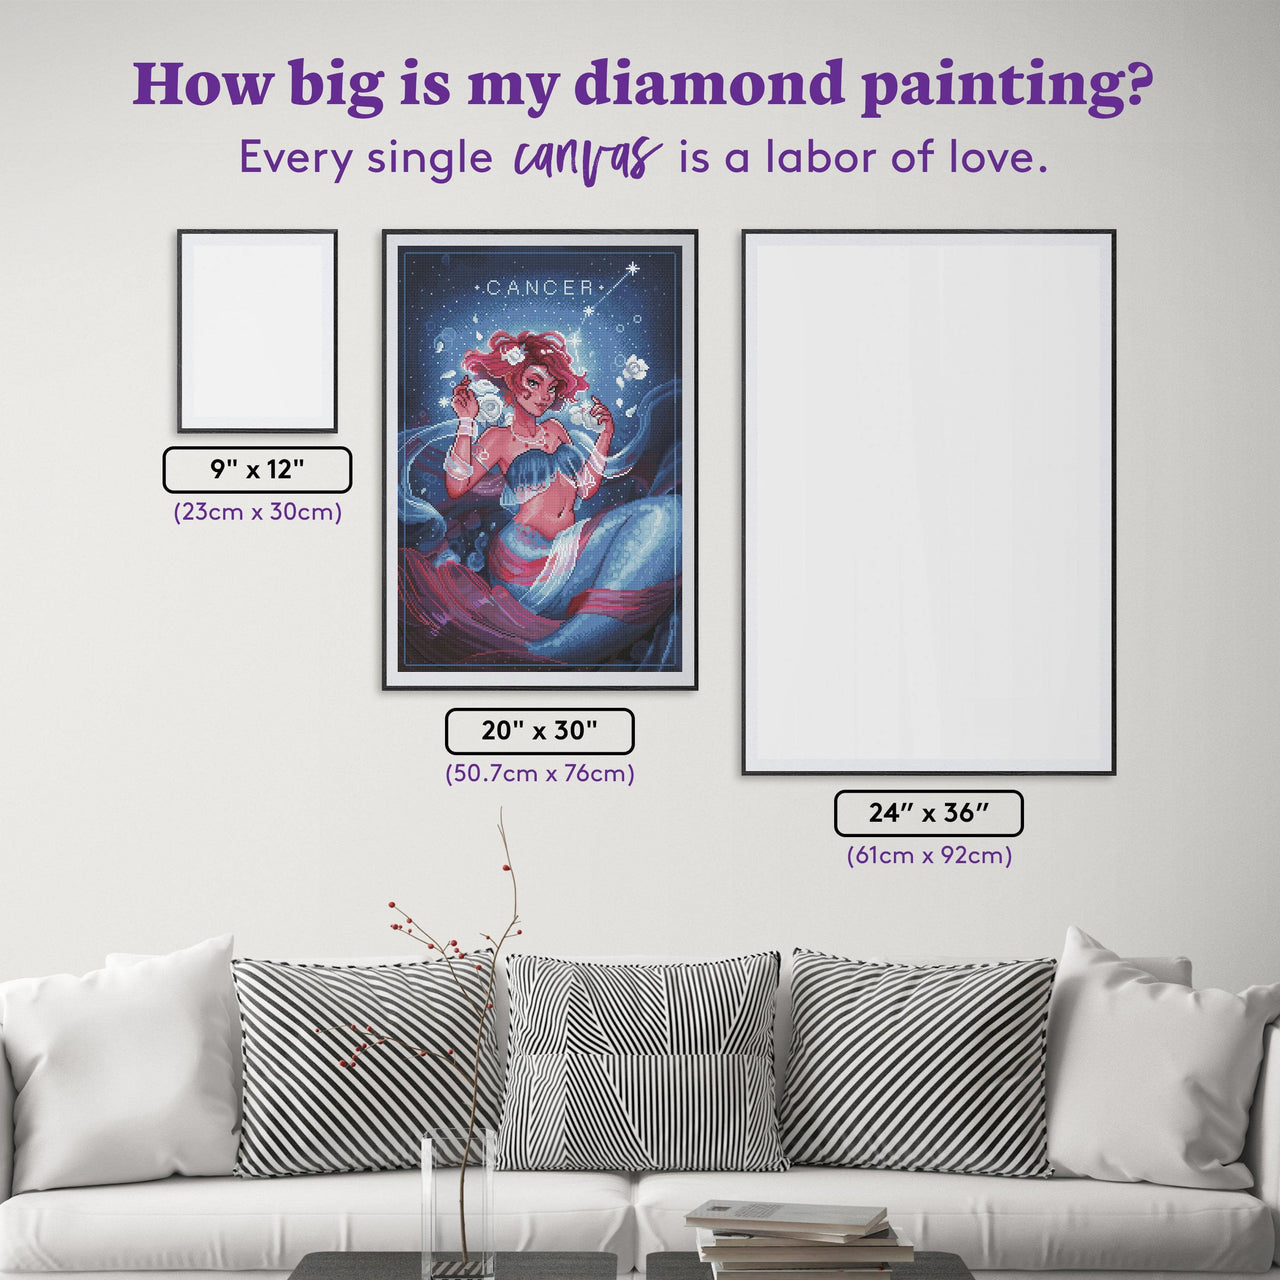 Diamond Painting Cancer - CB 20" x 30" (50.7cm x 76cm) / Round with 45 Colors including 4 ABs and 1 Fairy Dust Diamonds / 49,051